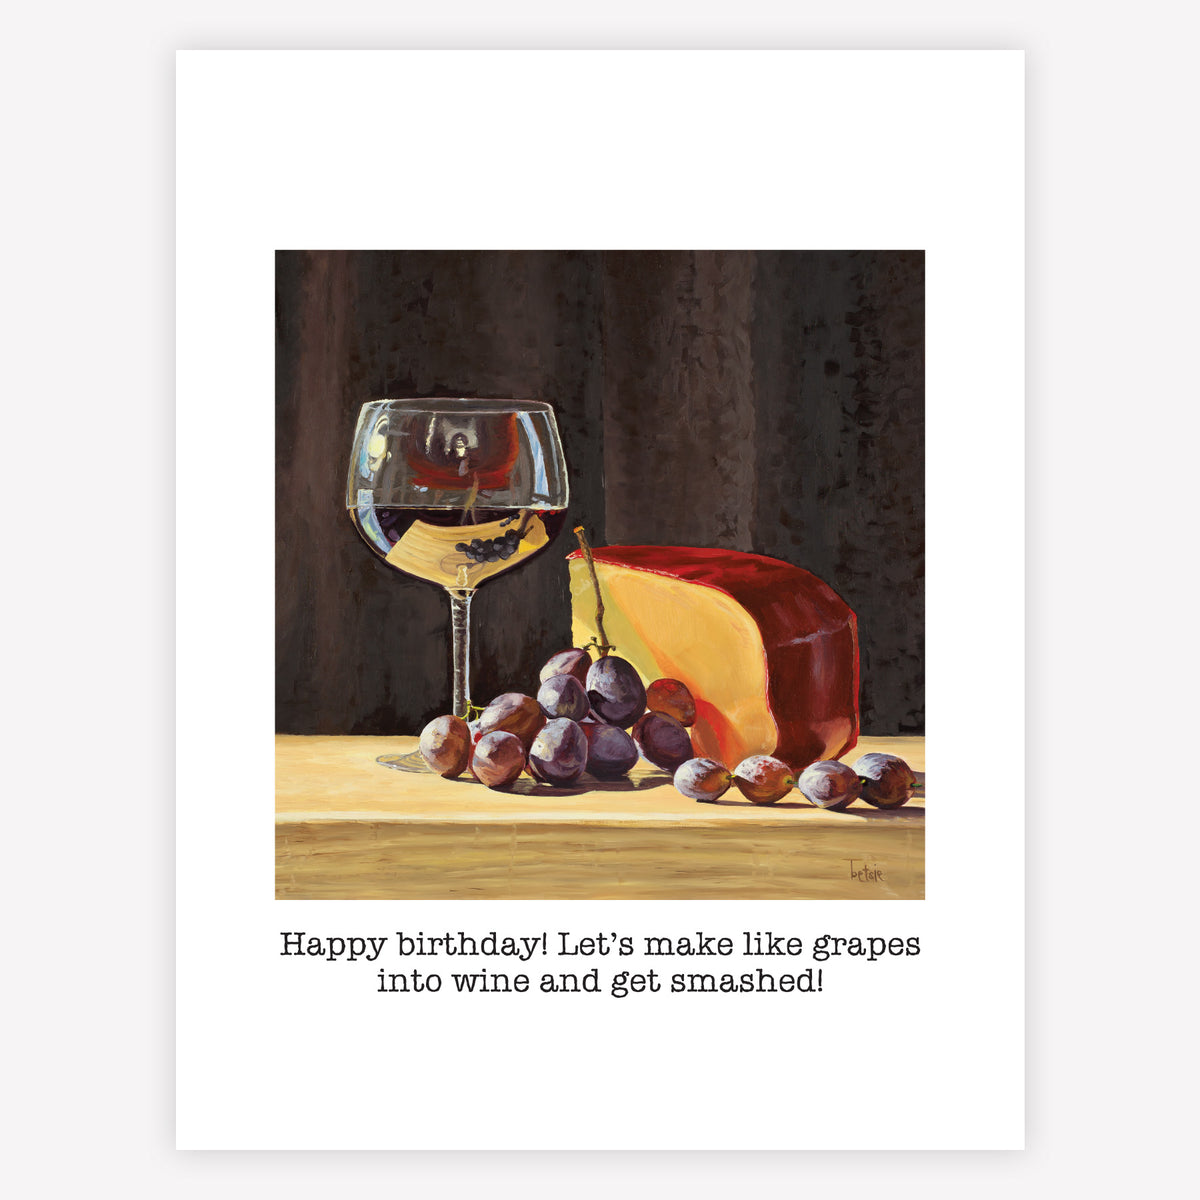 "Happy birthday! Let's make like grapes" Greeting Card